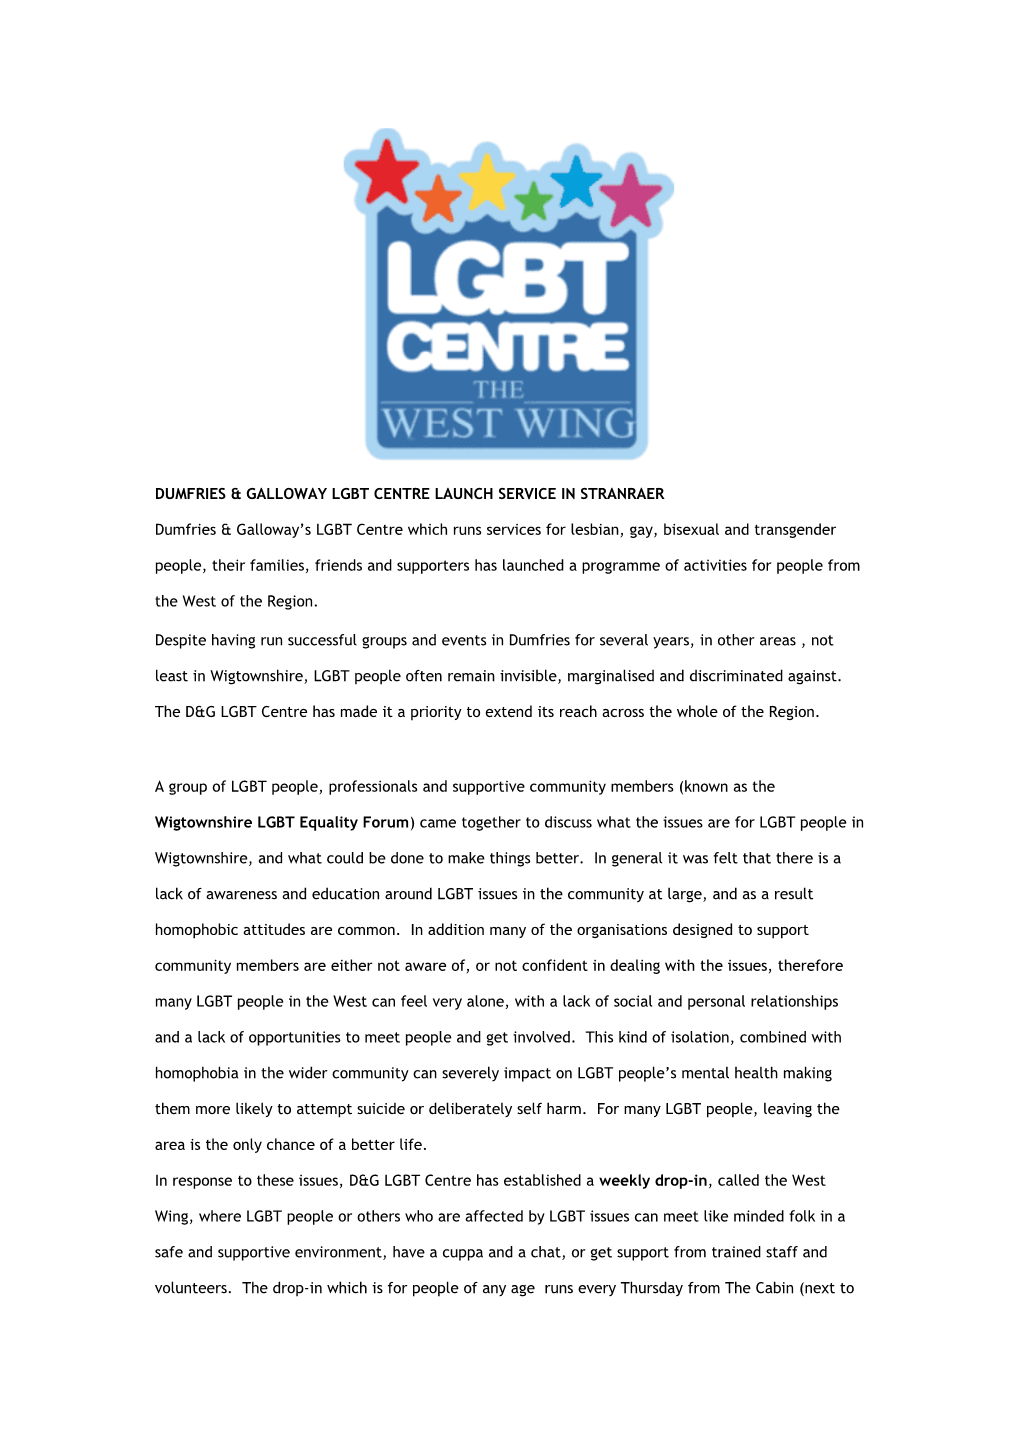 Dumfries & Galloway Lgbt Centre Launch Service in Stranraer